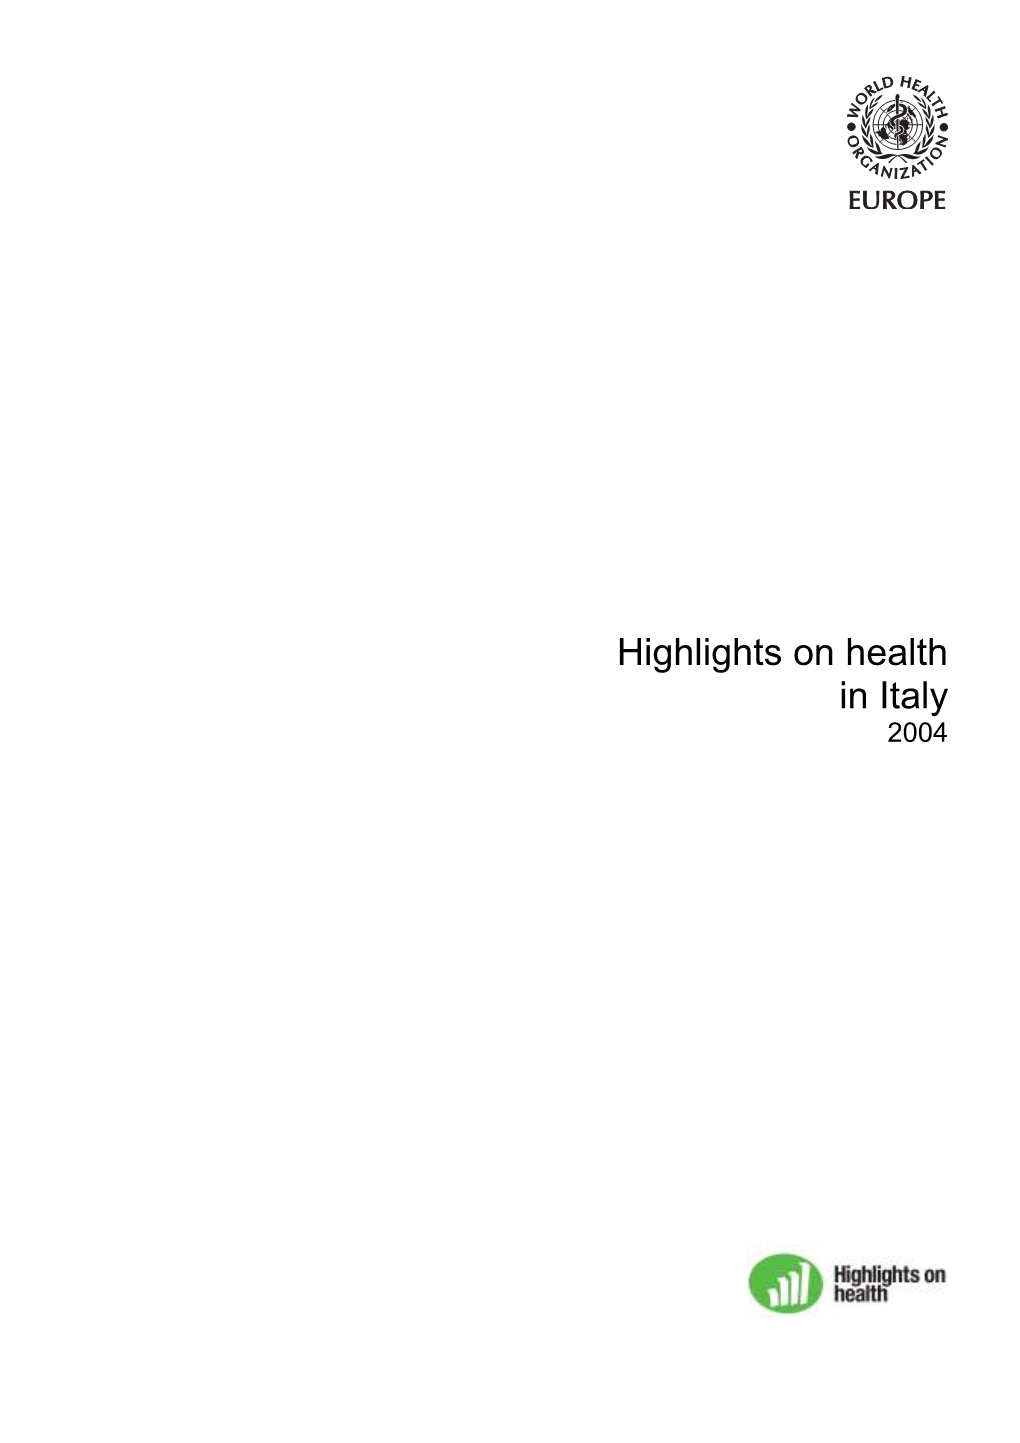 Highlights for Health in Italy 2004